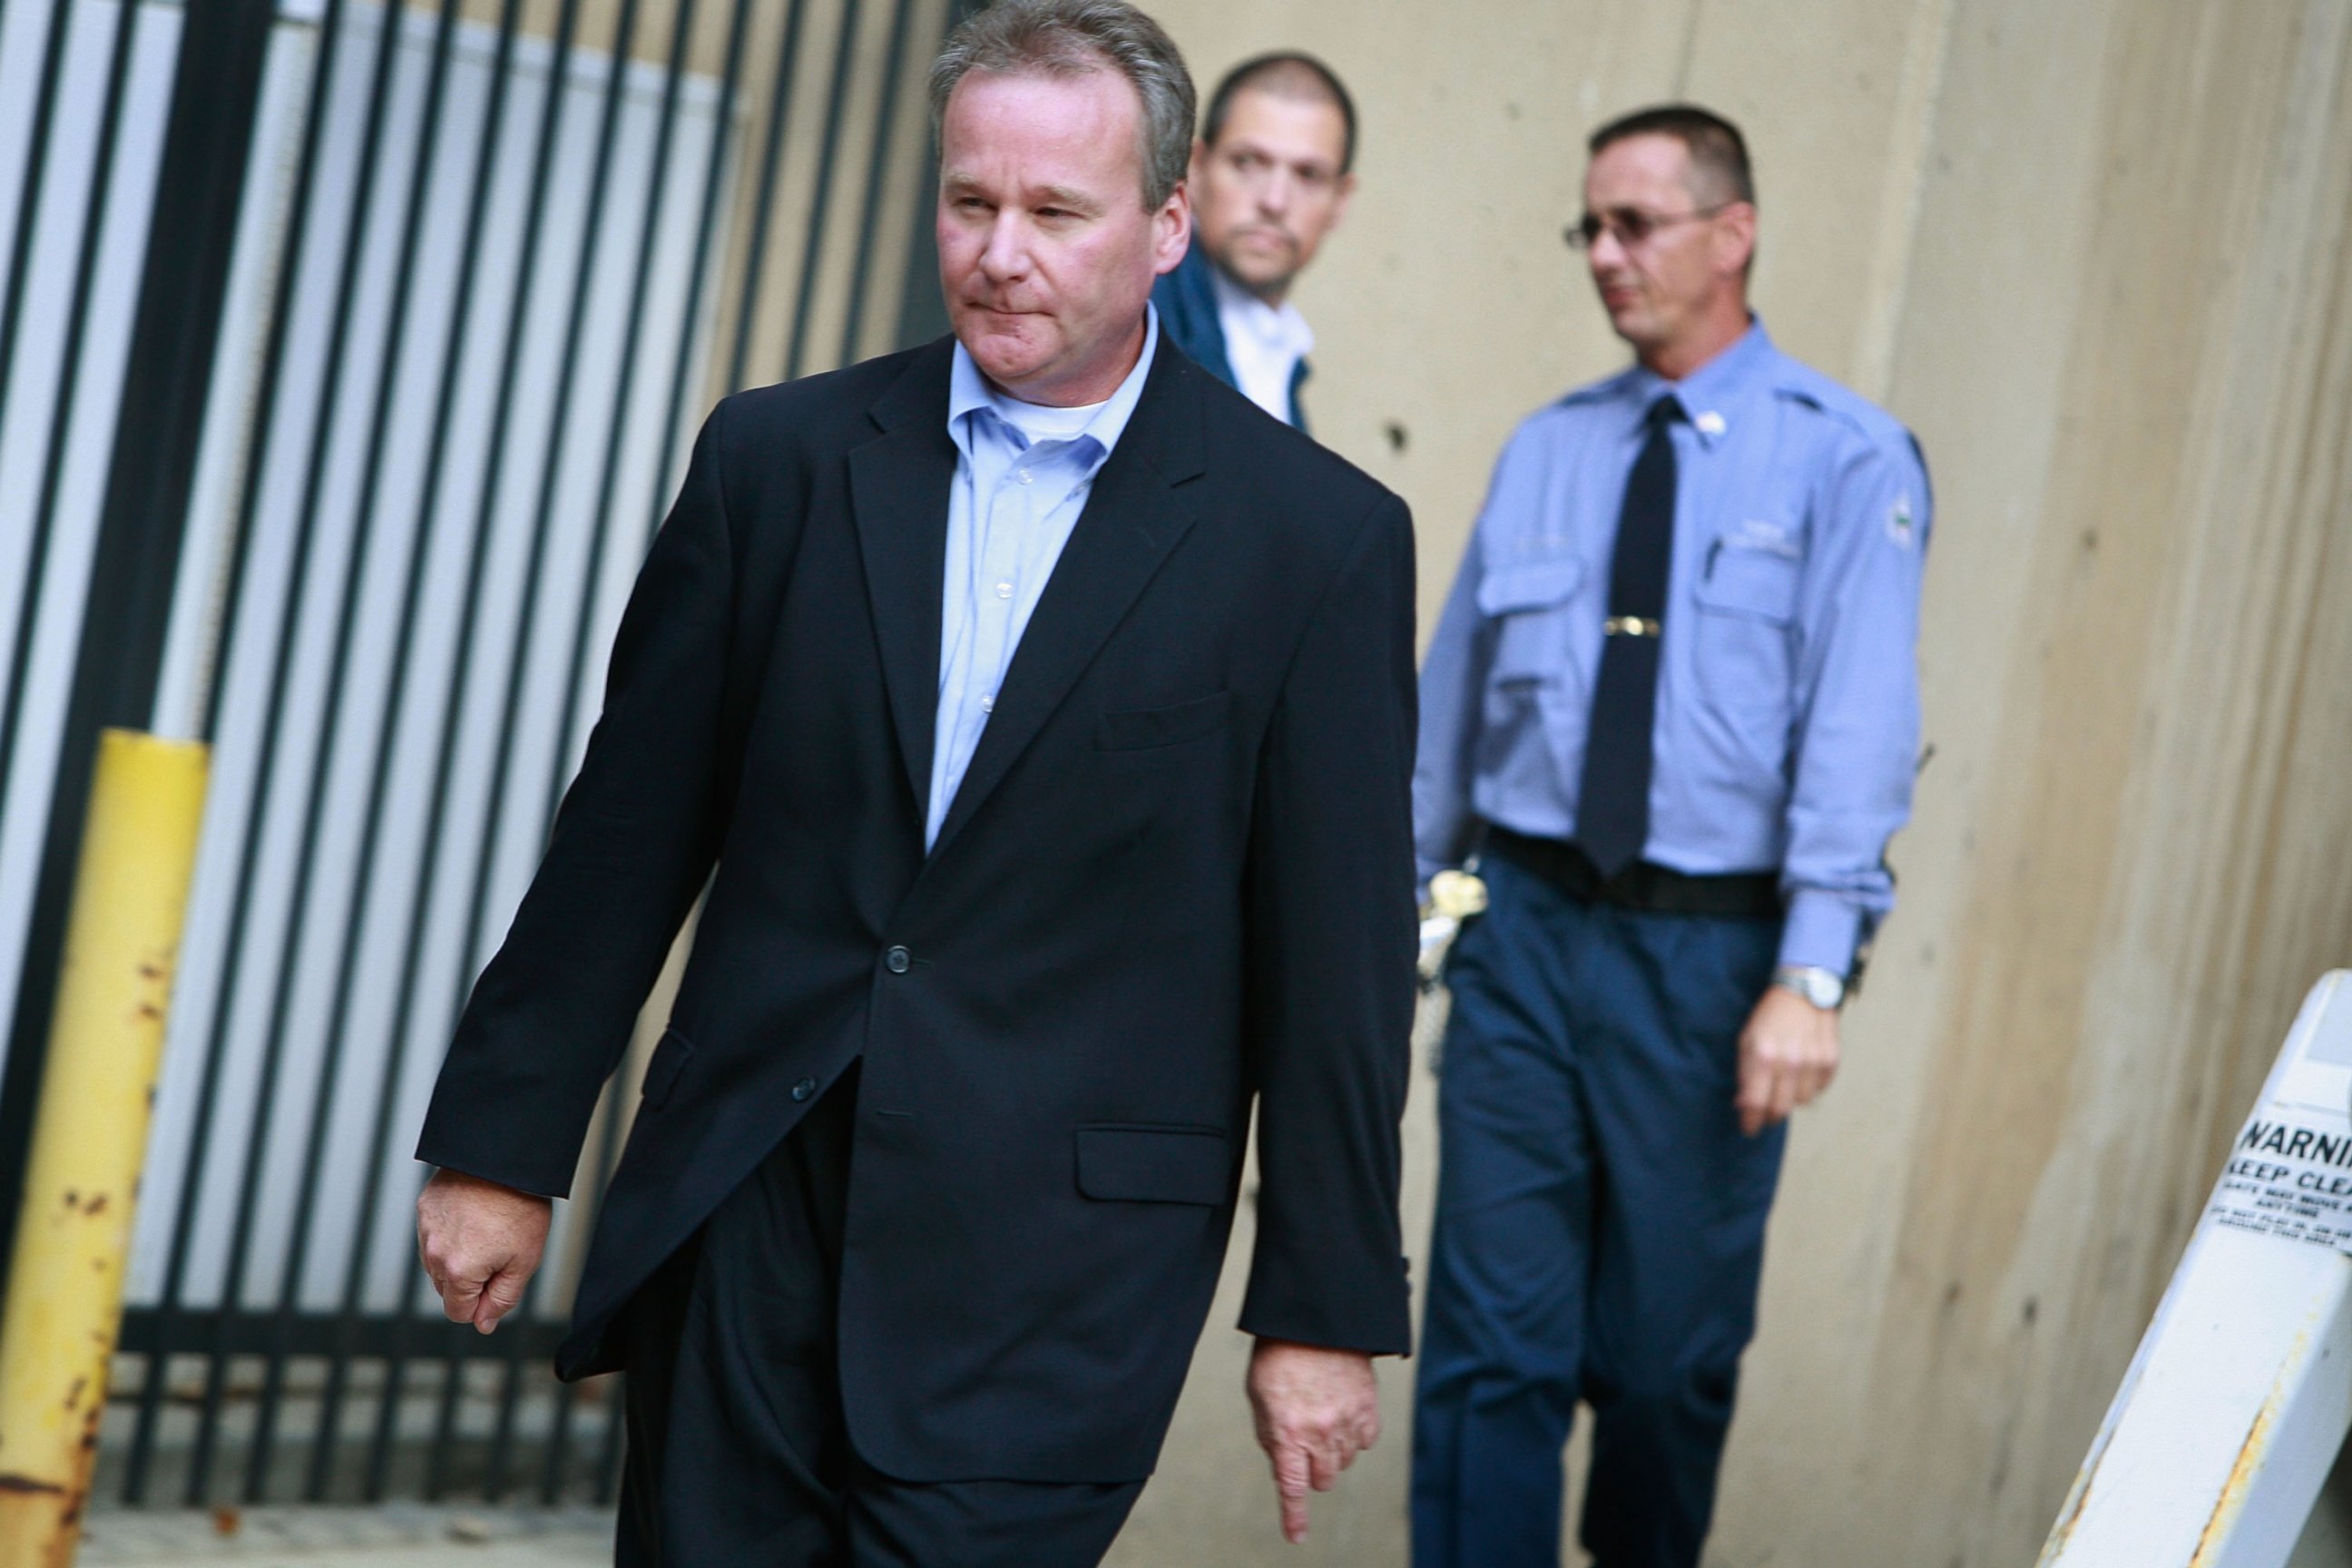 PHOTO: Michael David Barrett leaves the Metropolitan Correctional Center after posting bond, Oct. 5, 2009 in Chicago, Illinois.